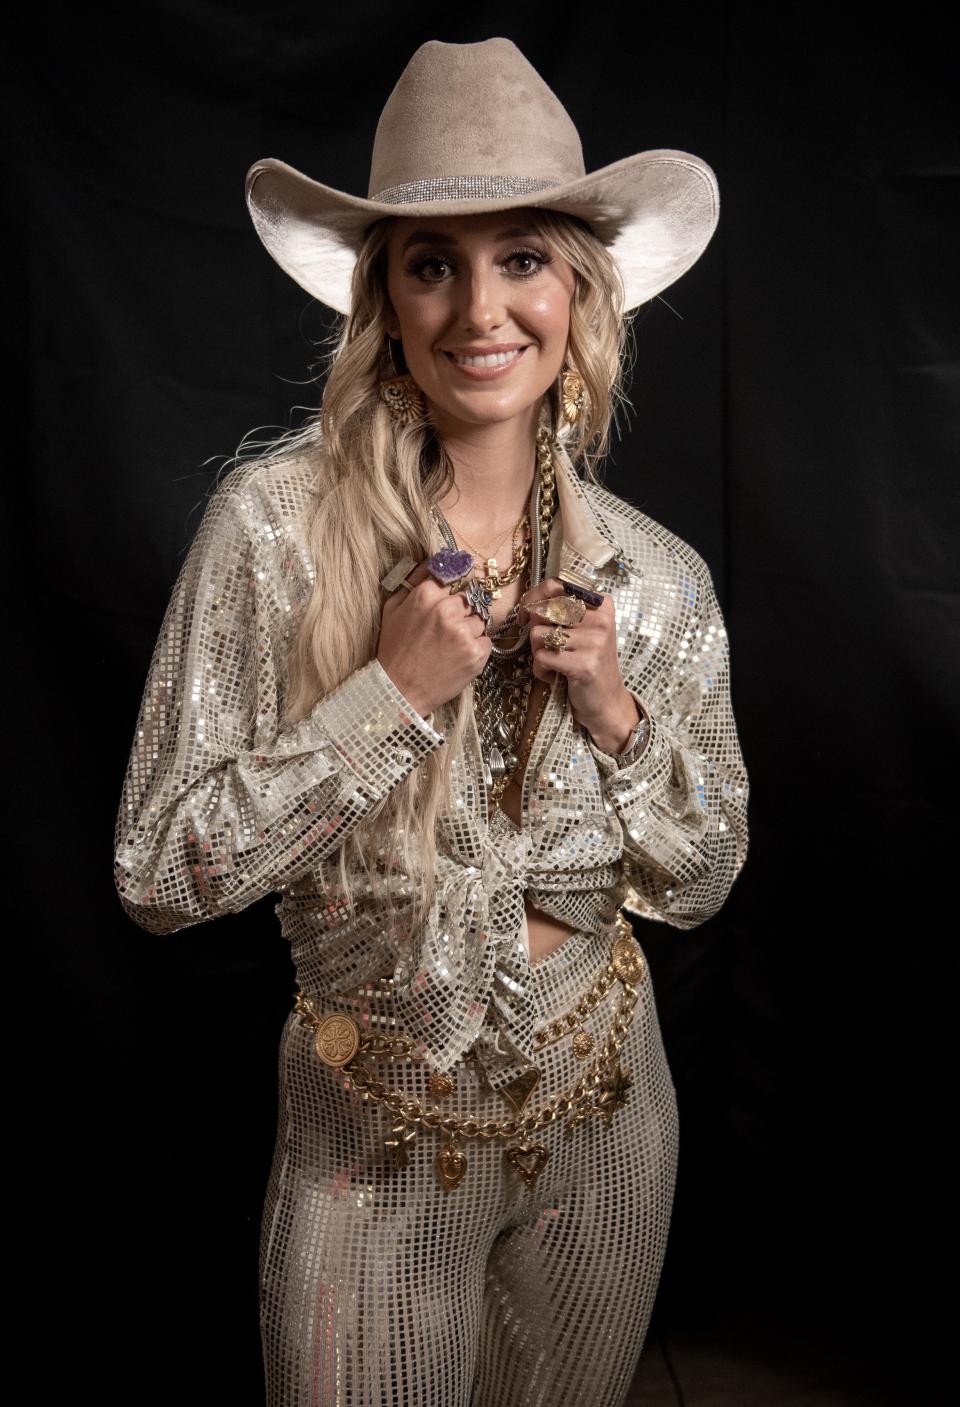 Lainey Wilson backstage at the Grand Ole Opry during the People's Choice Country Awards in Nashville, Tenn. on Thursday Sept. 28, 2023.